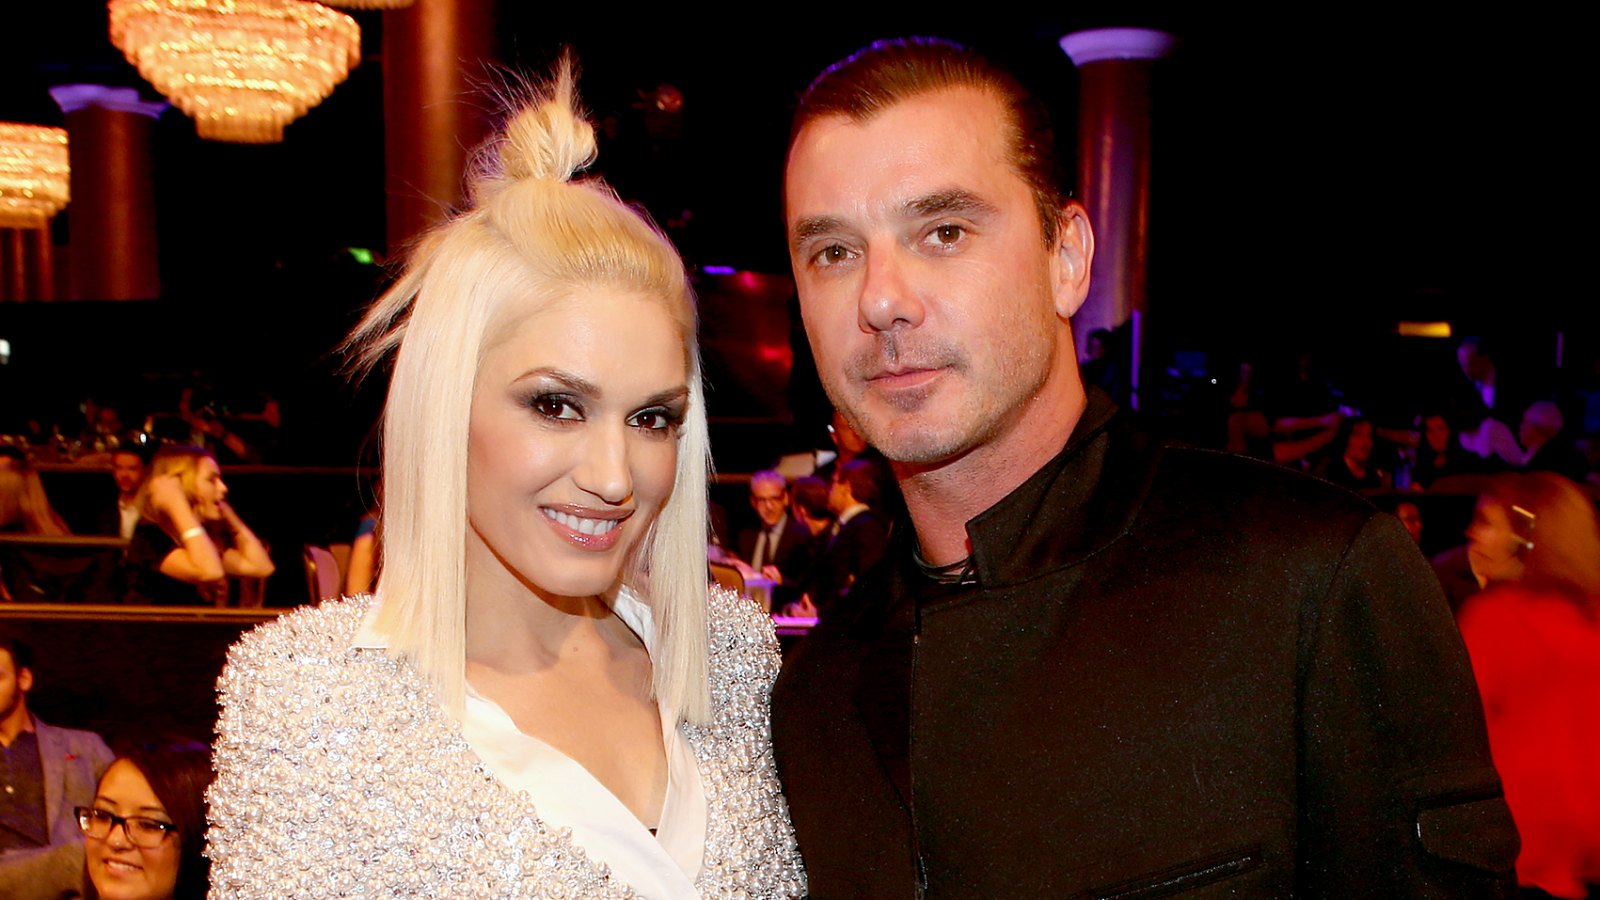 Gavin-Rossdale-Coparenting-With-Gwen-Stafani